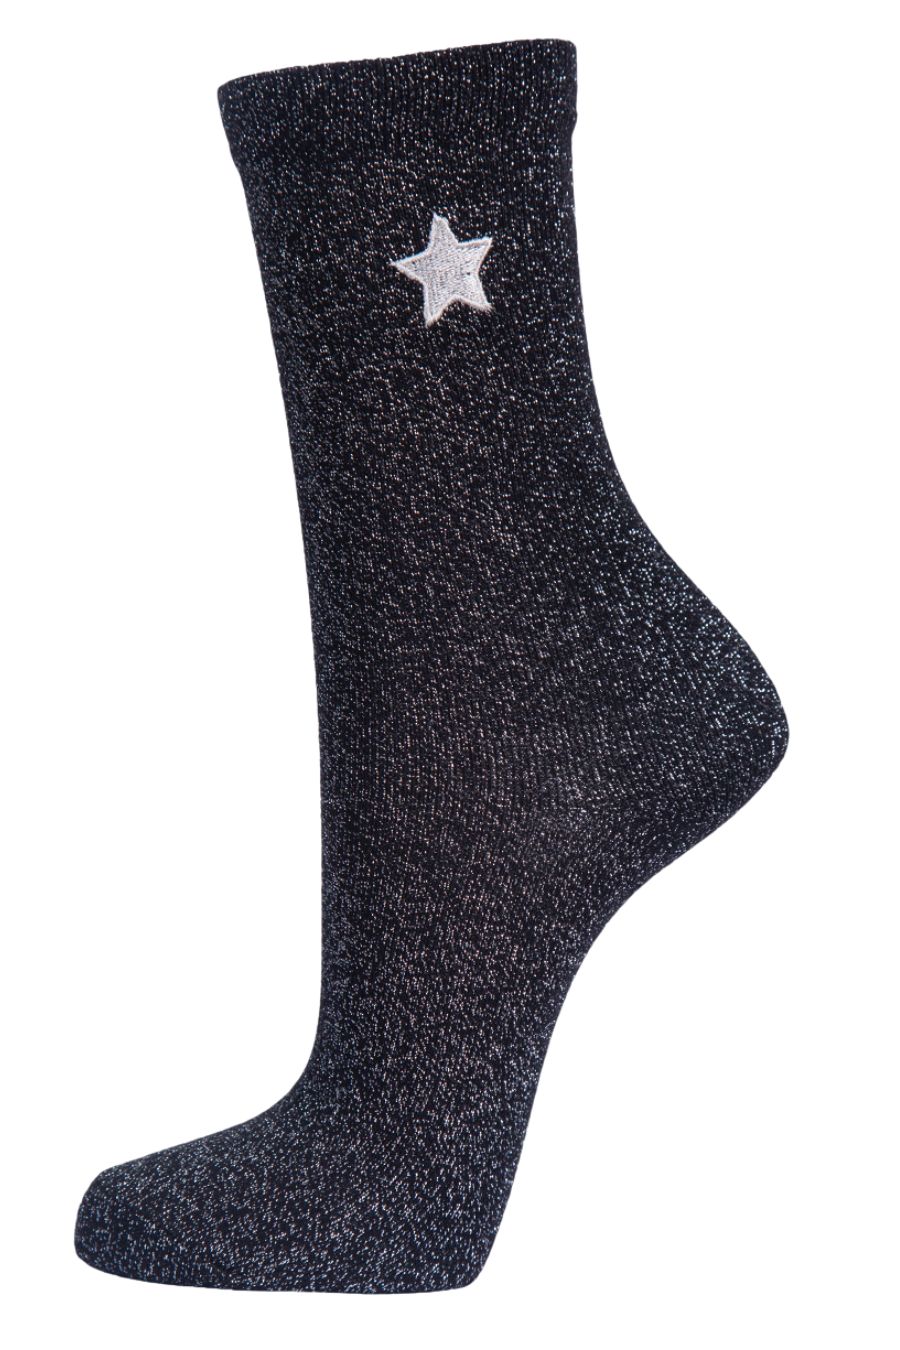 black and silver glitter ankle socks with a silver embroidered star on the ankle